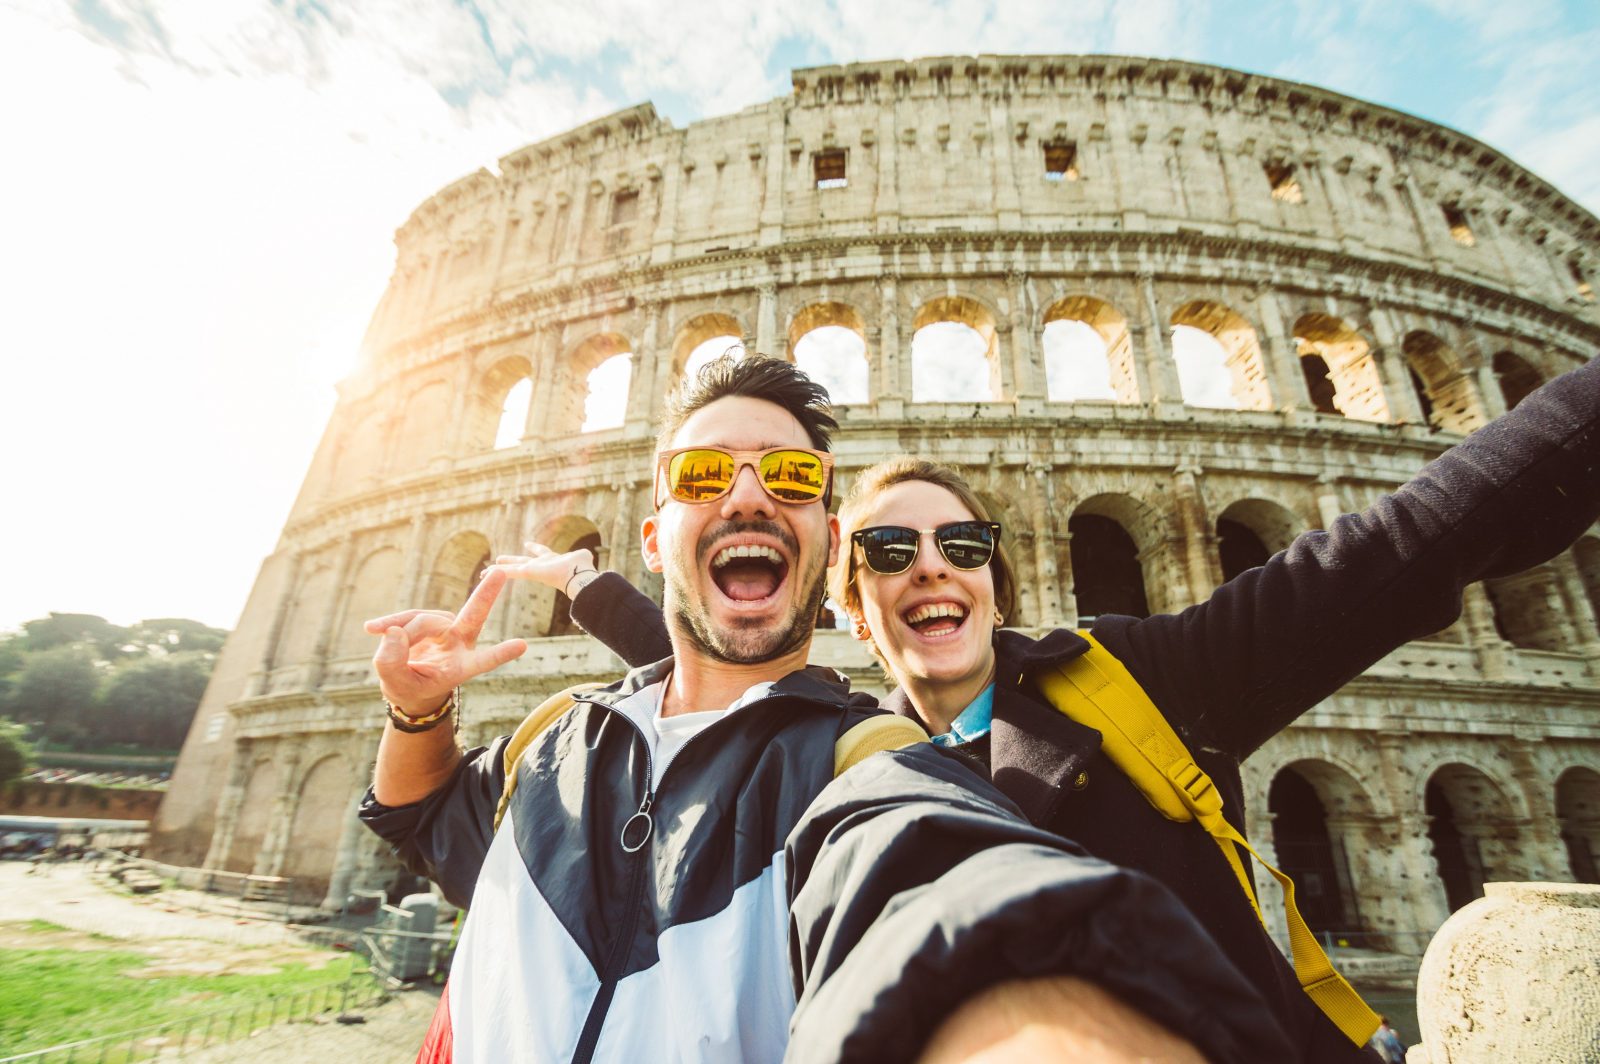 Can You Score 12/15 on This European Capital City Quiz? Tourists Taking Selfie In Rome, Italy